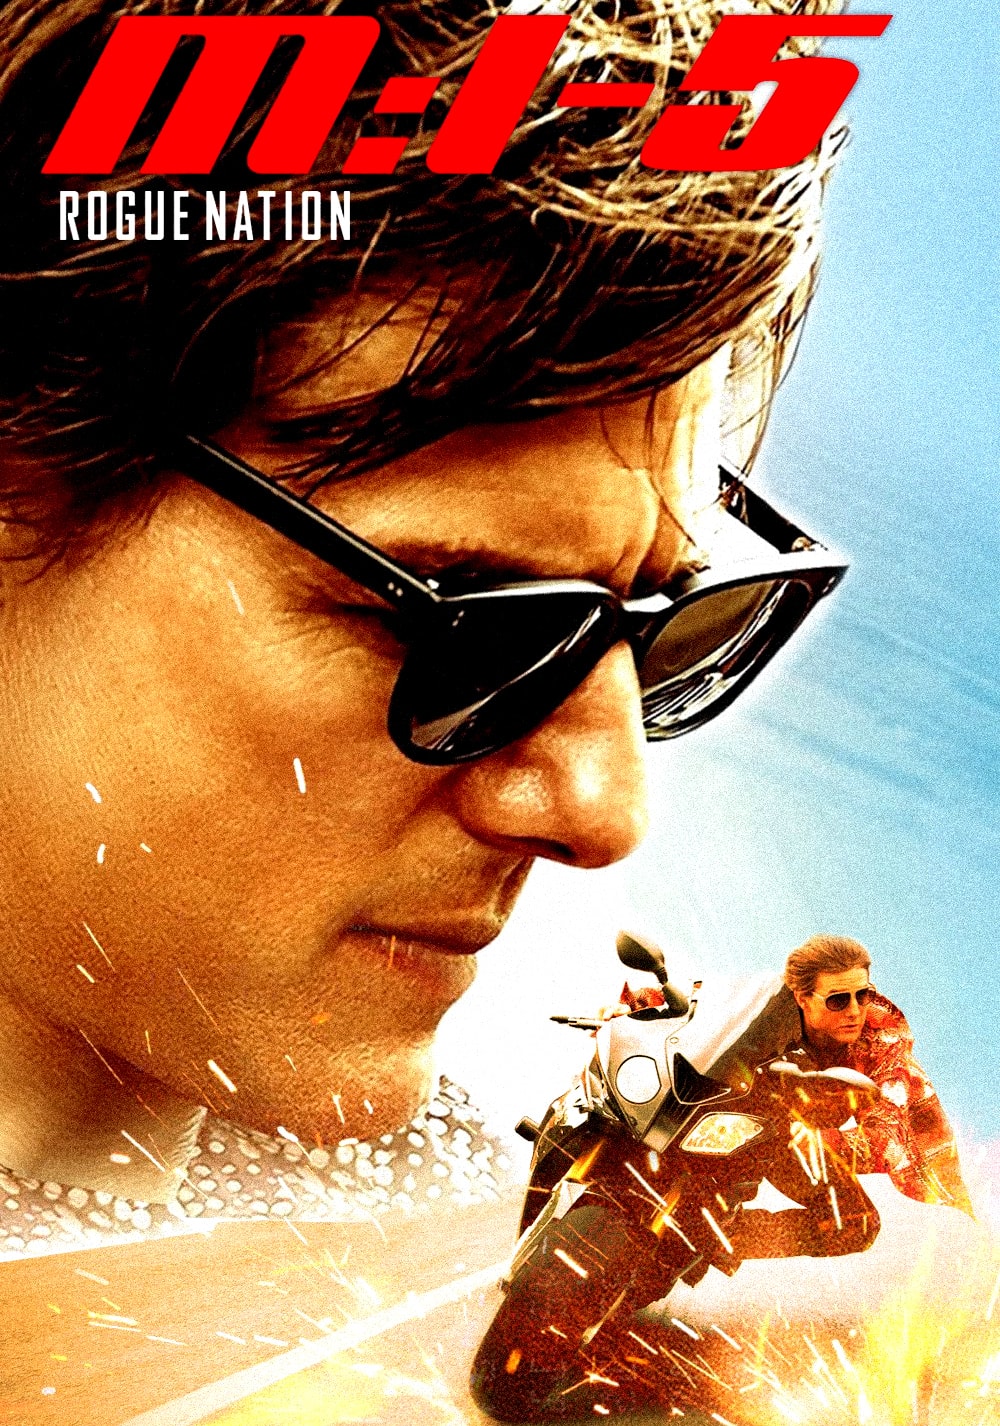 Download Mission: Impossible – Rogue Nation (2015) (Dual Audio) Blu-Ray Movie In 480p [450 MB] | 720p [900 MB] | 1080p [2.8 GB]